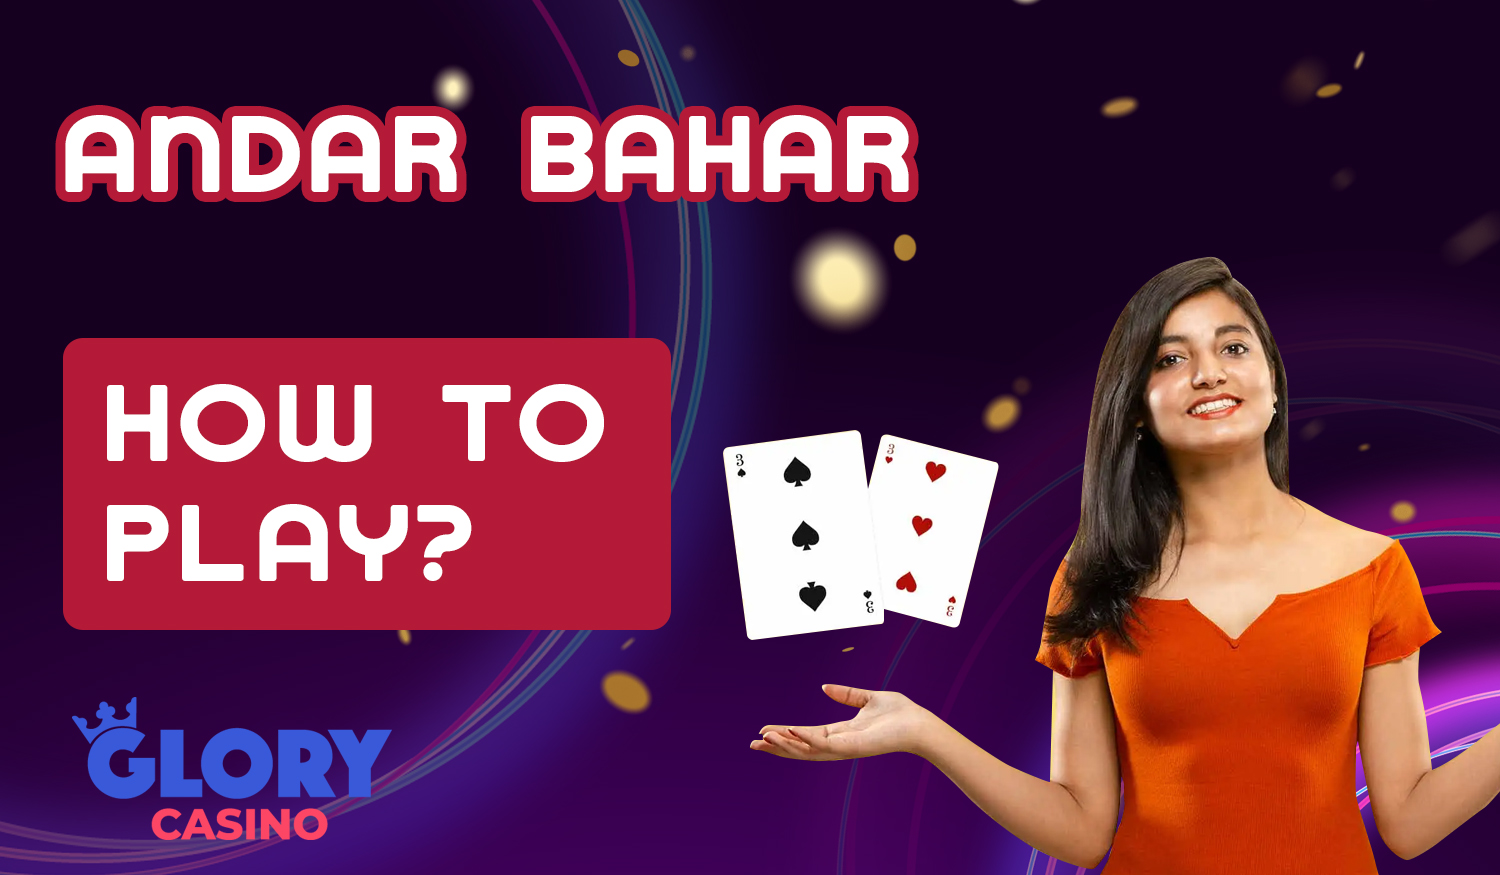 Step by step instructions to start playing Andar Bahar at Glory casino